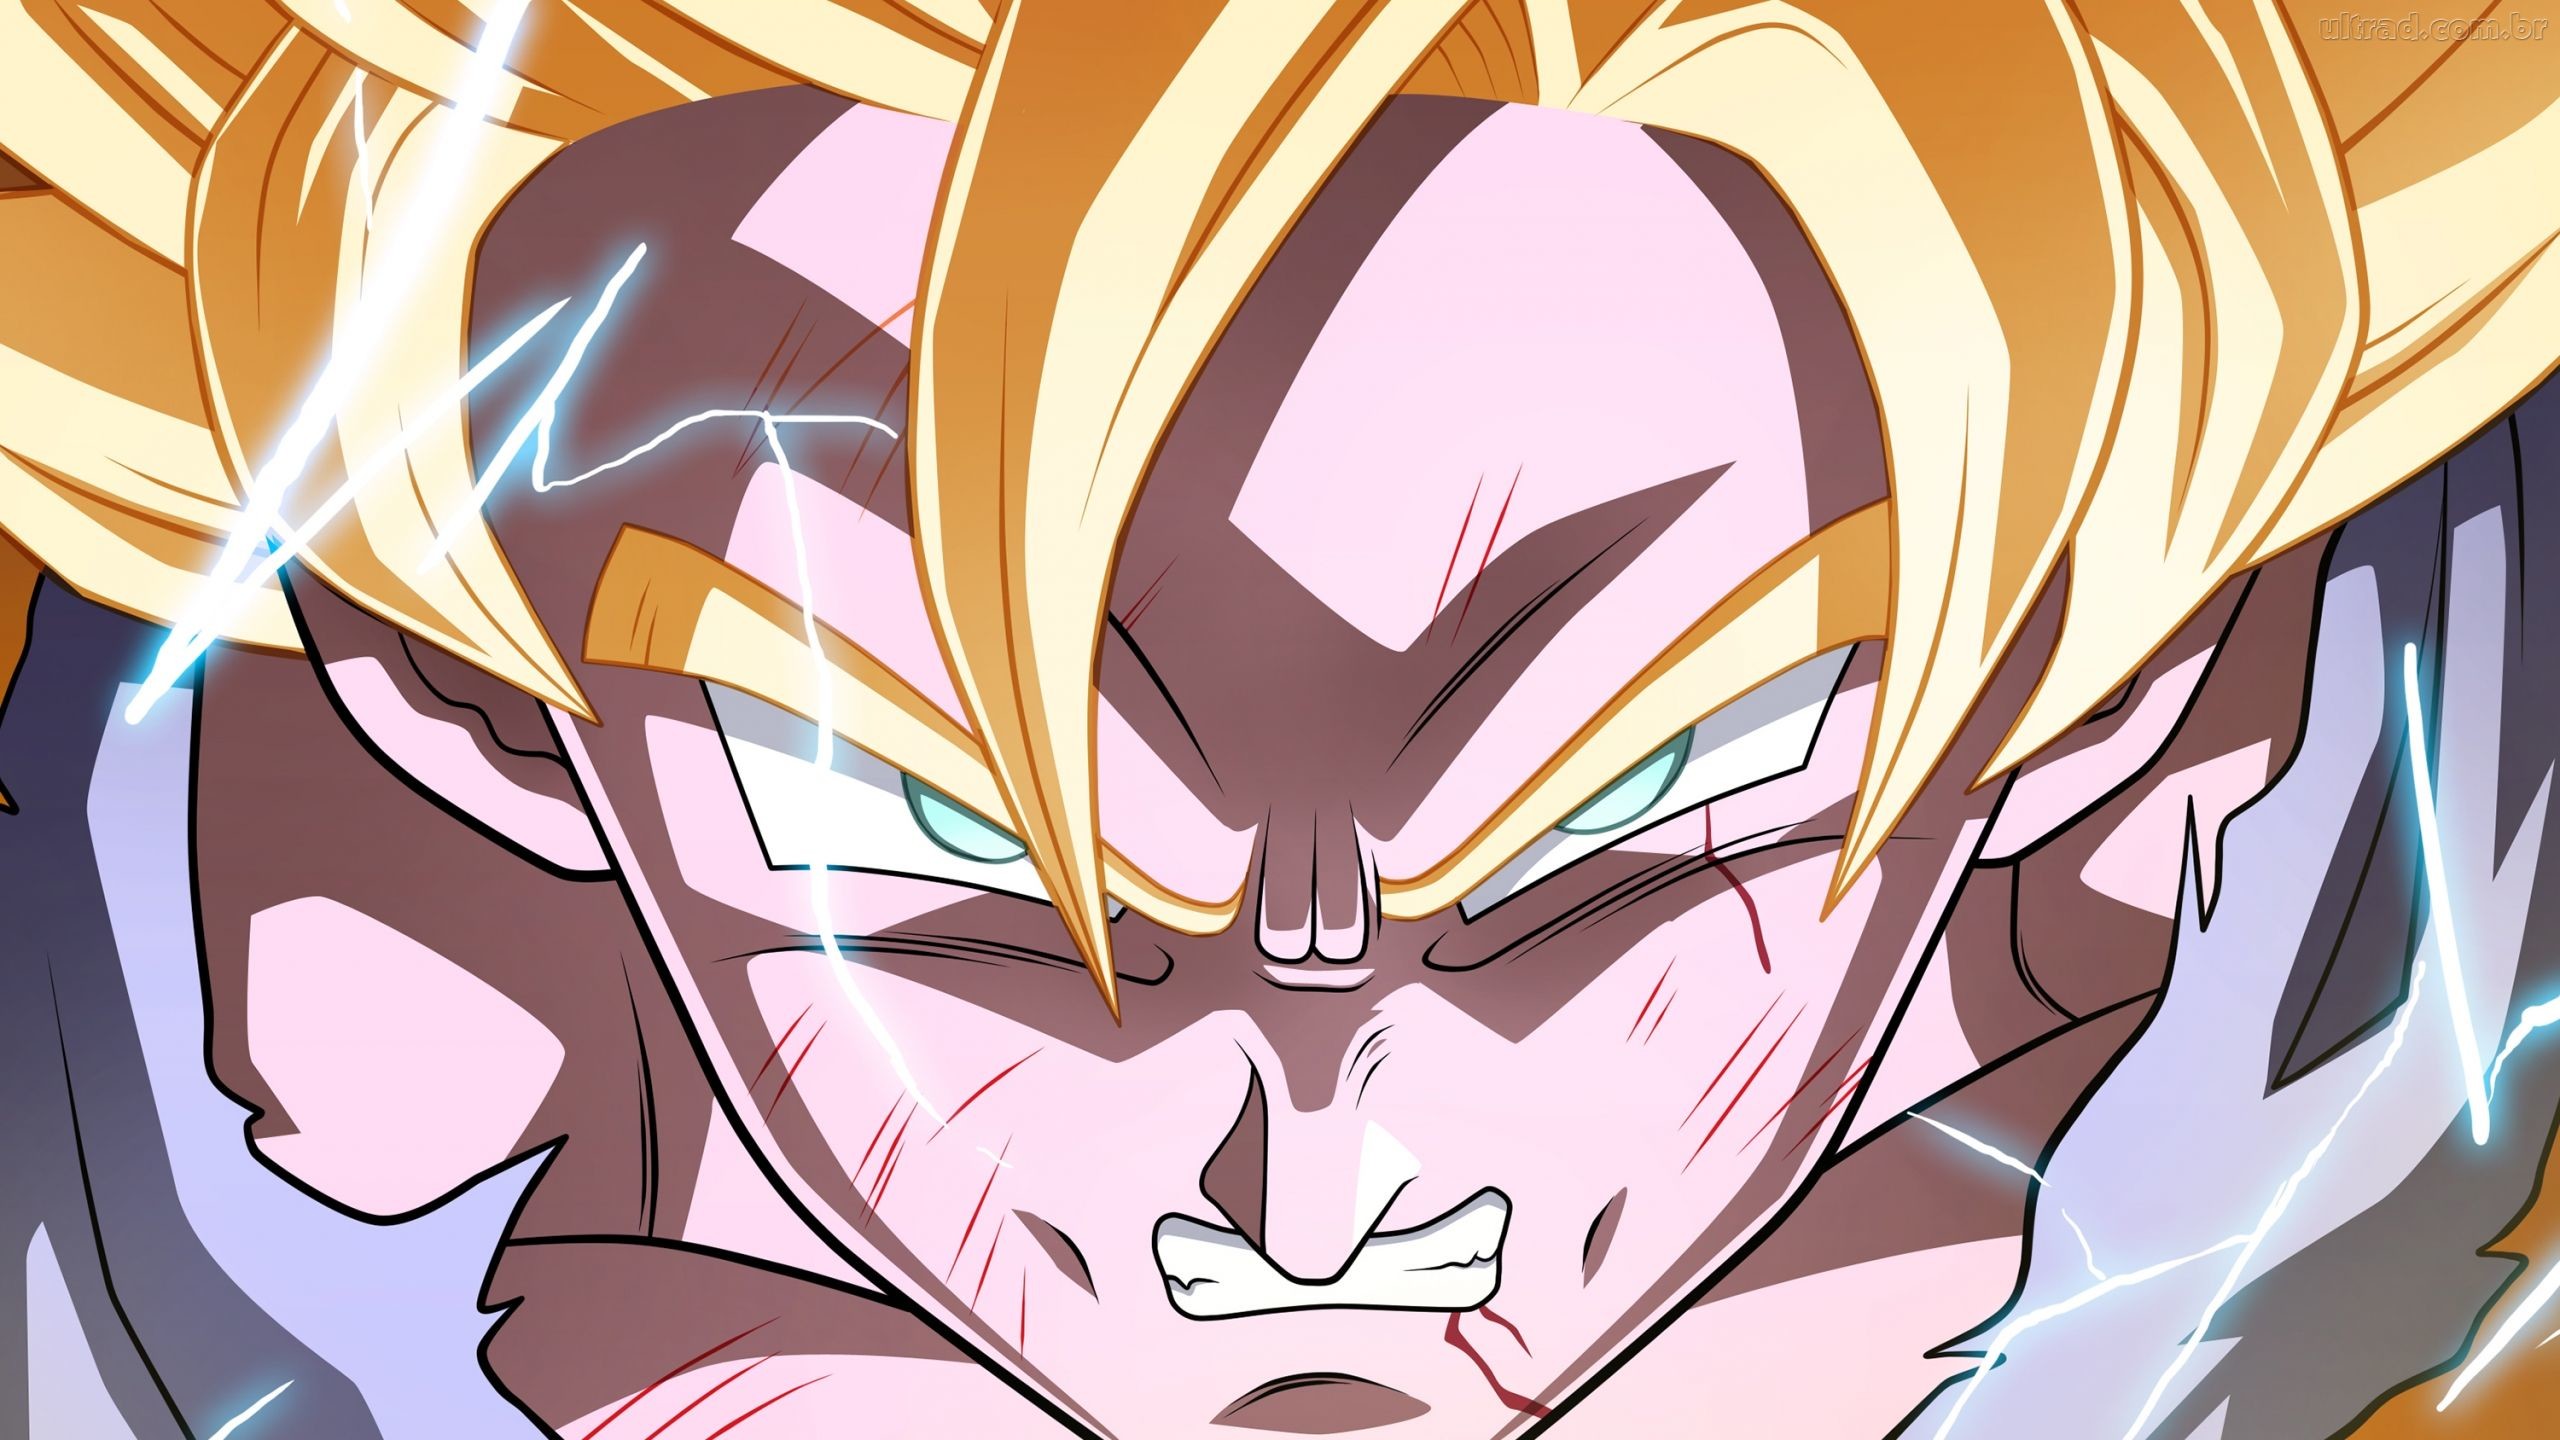 2560x1440 Super Saiyan 2 Goku, pissed off. I didn't have much time on my hands to do  it, but it was worth the time I spent on it, good fun.